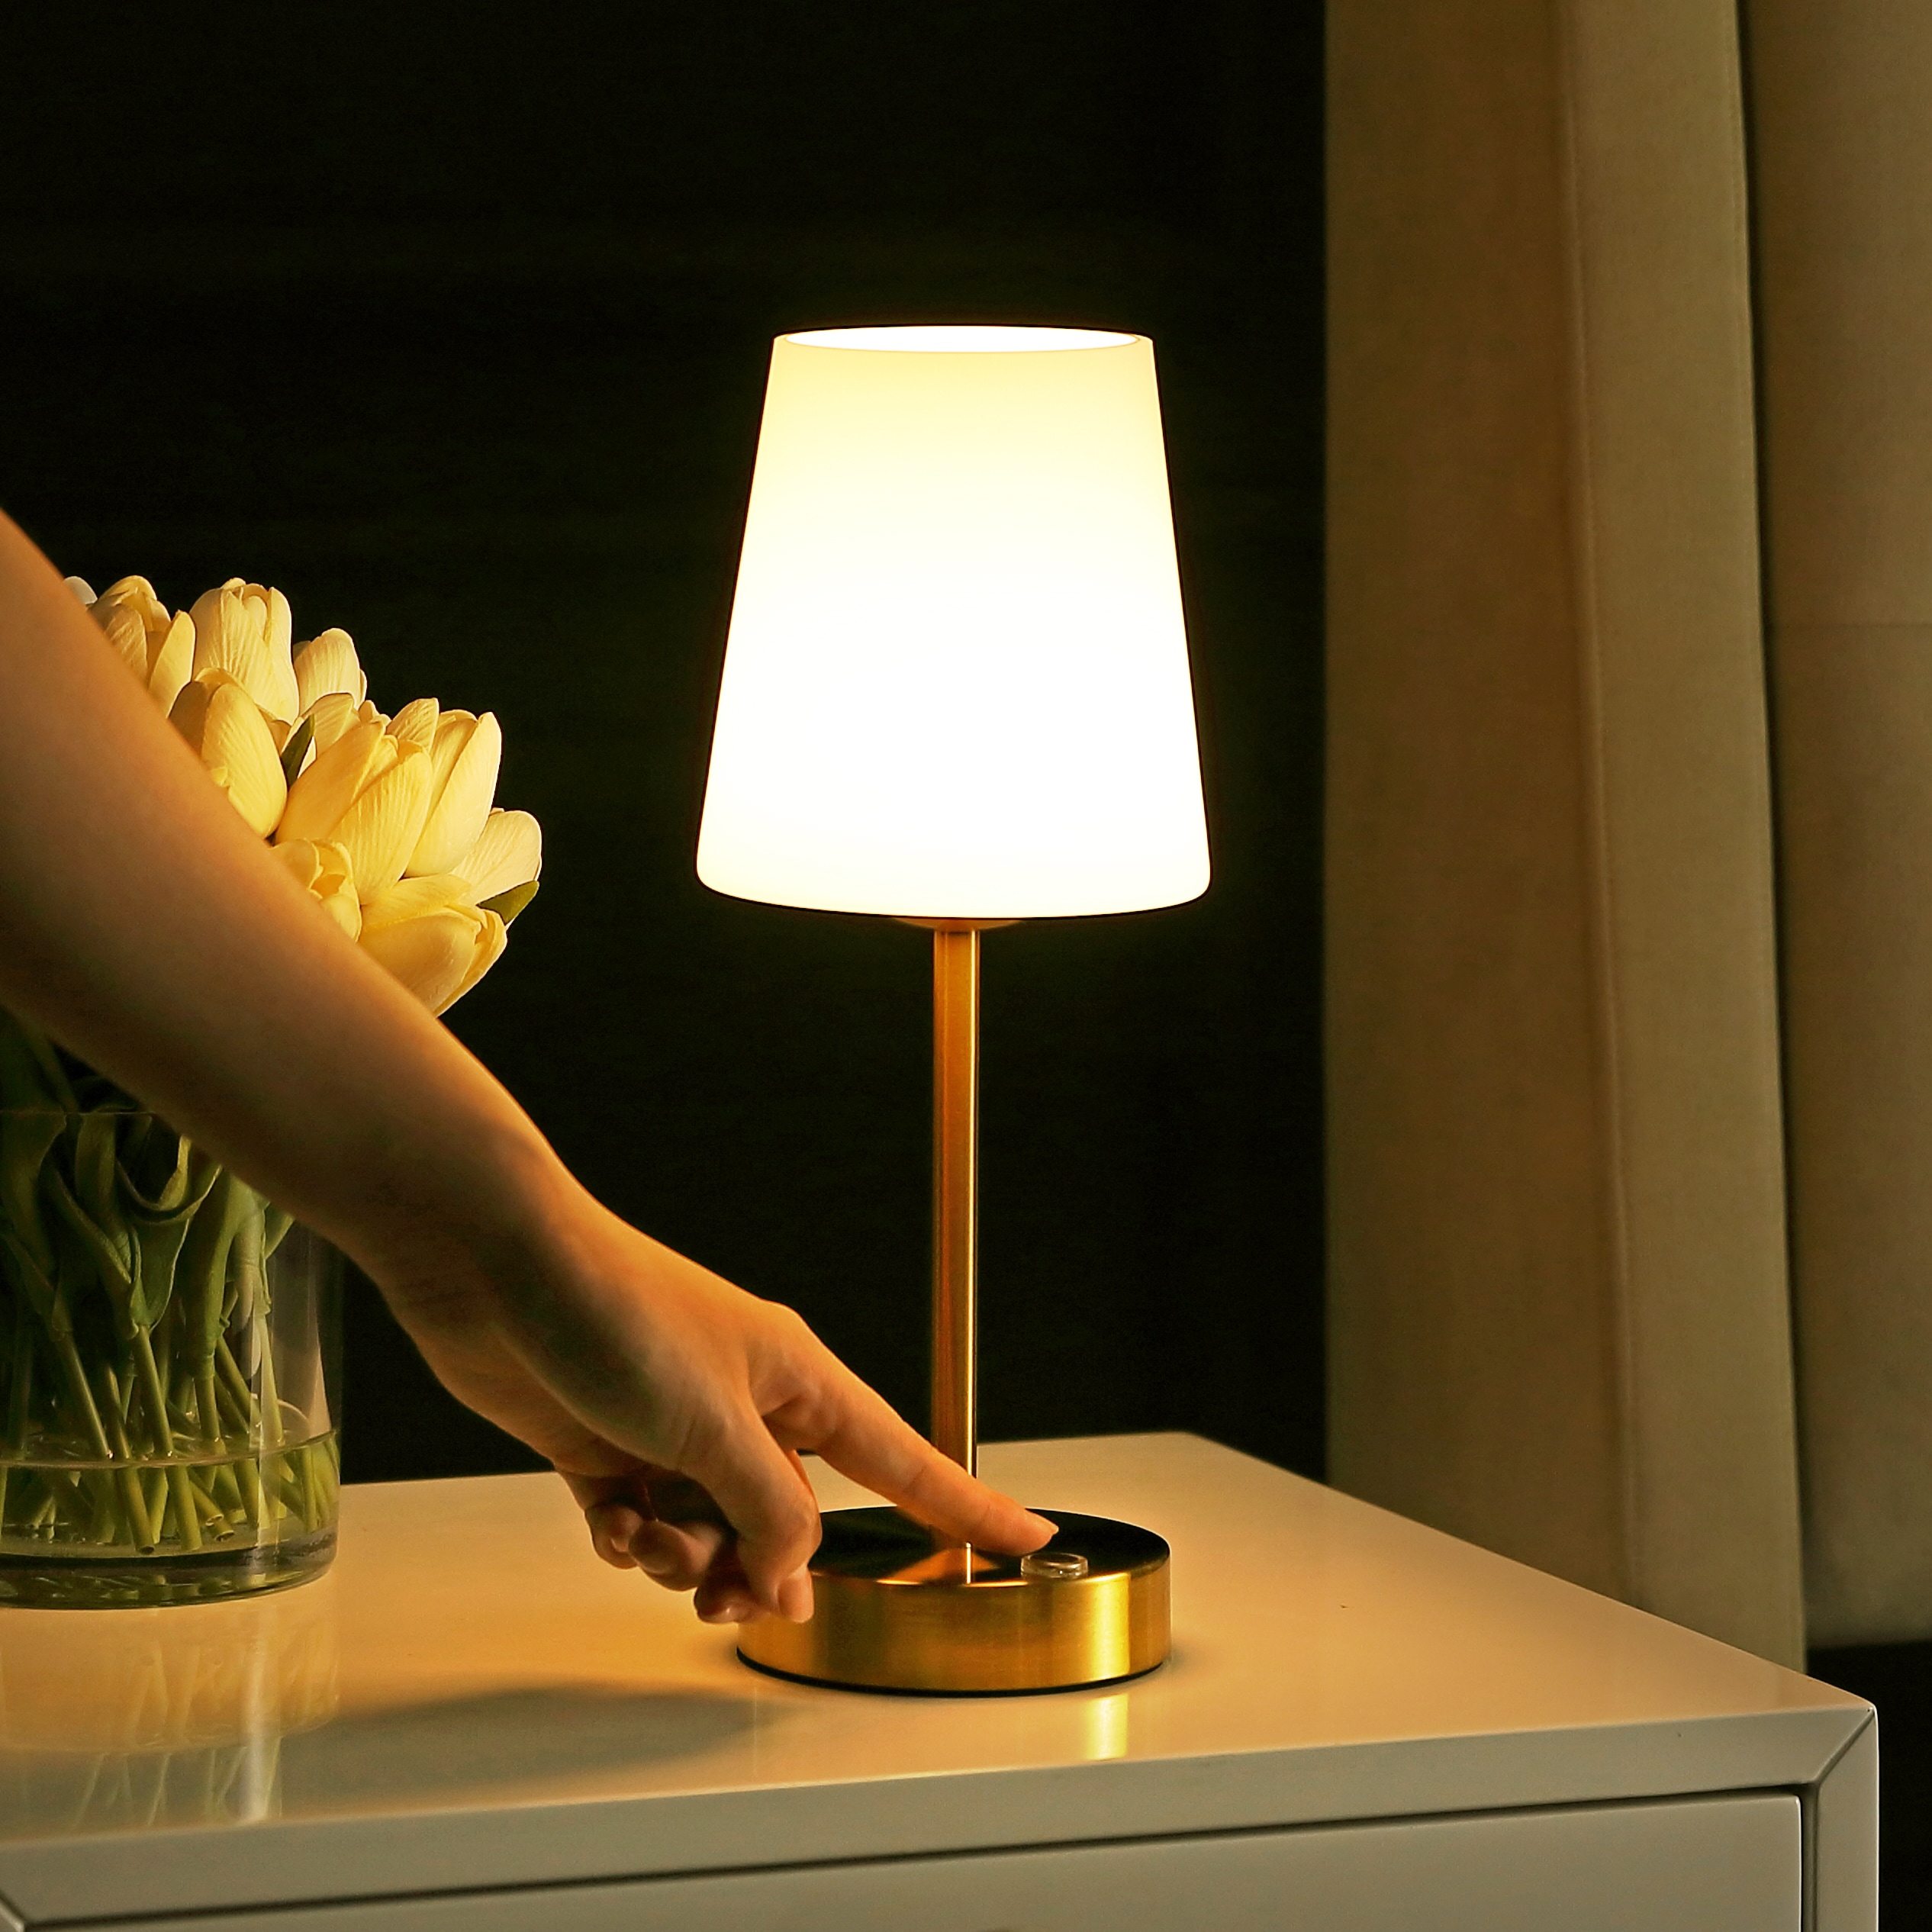 Stylish Battery-Operated Table Lamp: It's Small and Portable